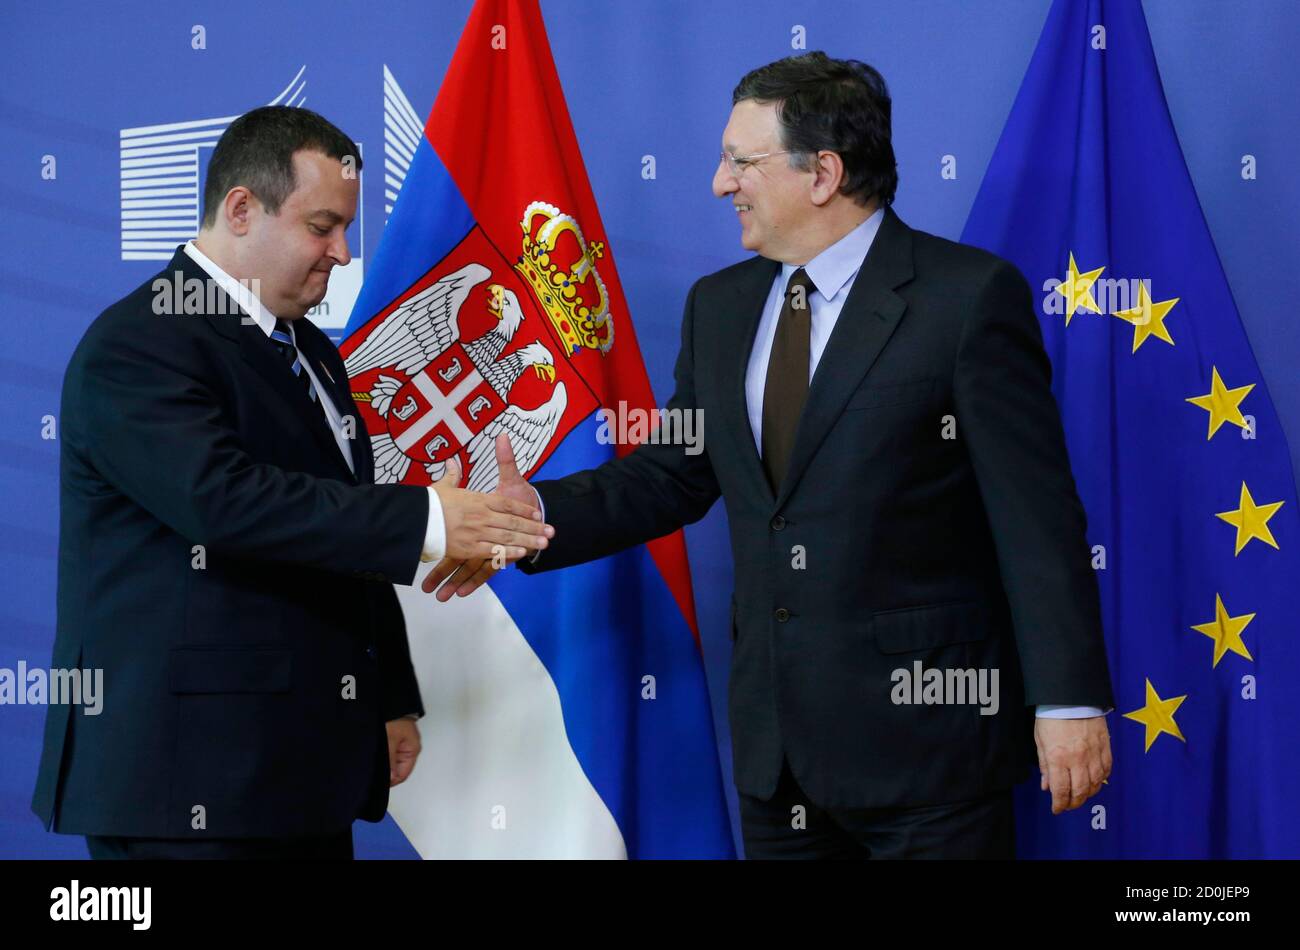 European Commision President Jose Manuel Barroso welcomes Serbian Prime Minister Ivica Dacic (L) before their meeting at the EU Commission headquarters in Brussels June 26, 2013.  REUTERS/Francois Lenoir (BELGIUM - Tags: POLITICS) Stock Photo